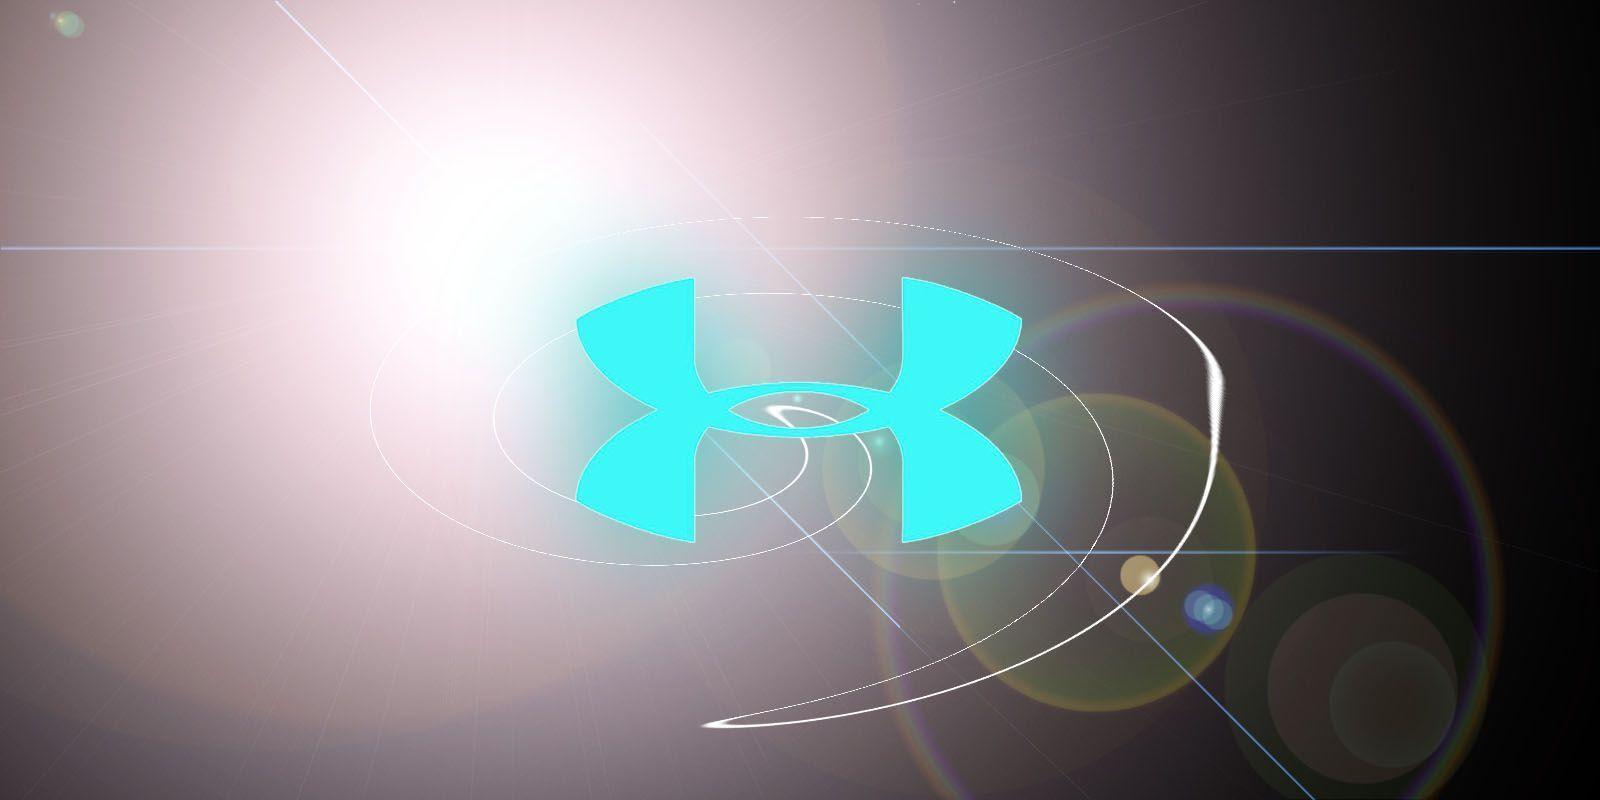 Under Armour Wallpapers